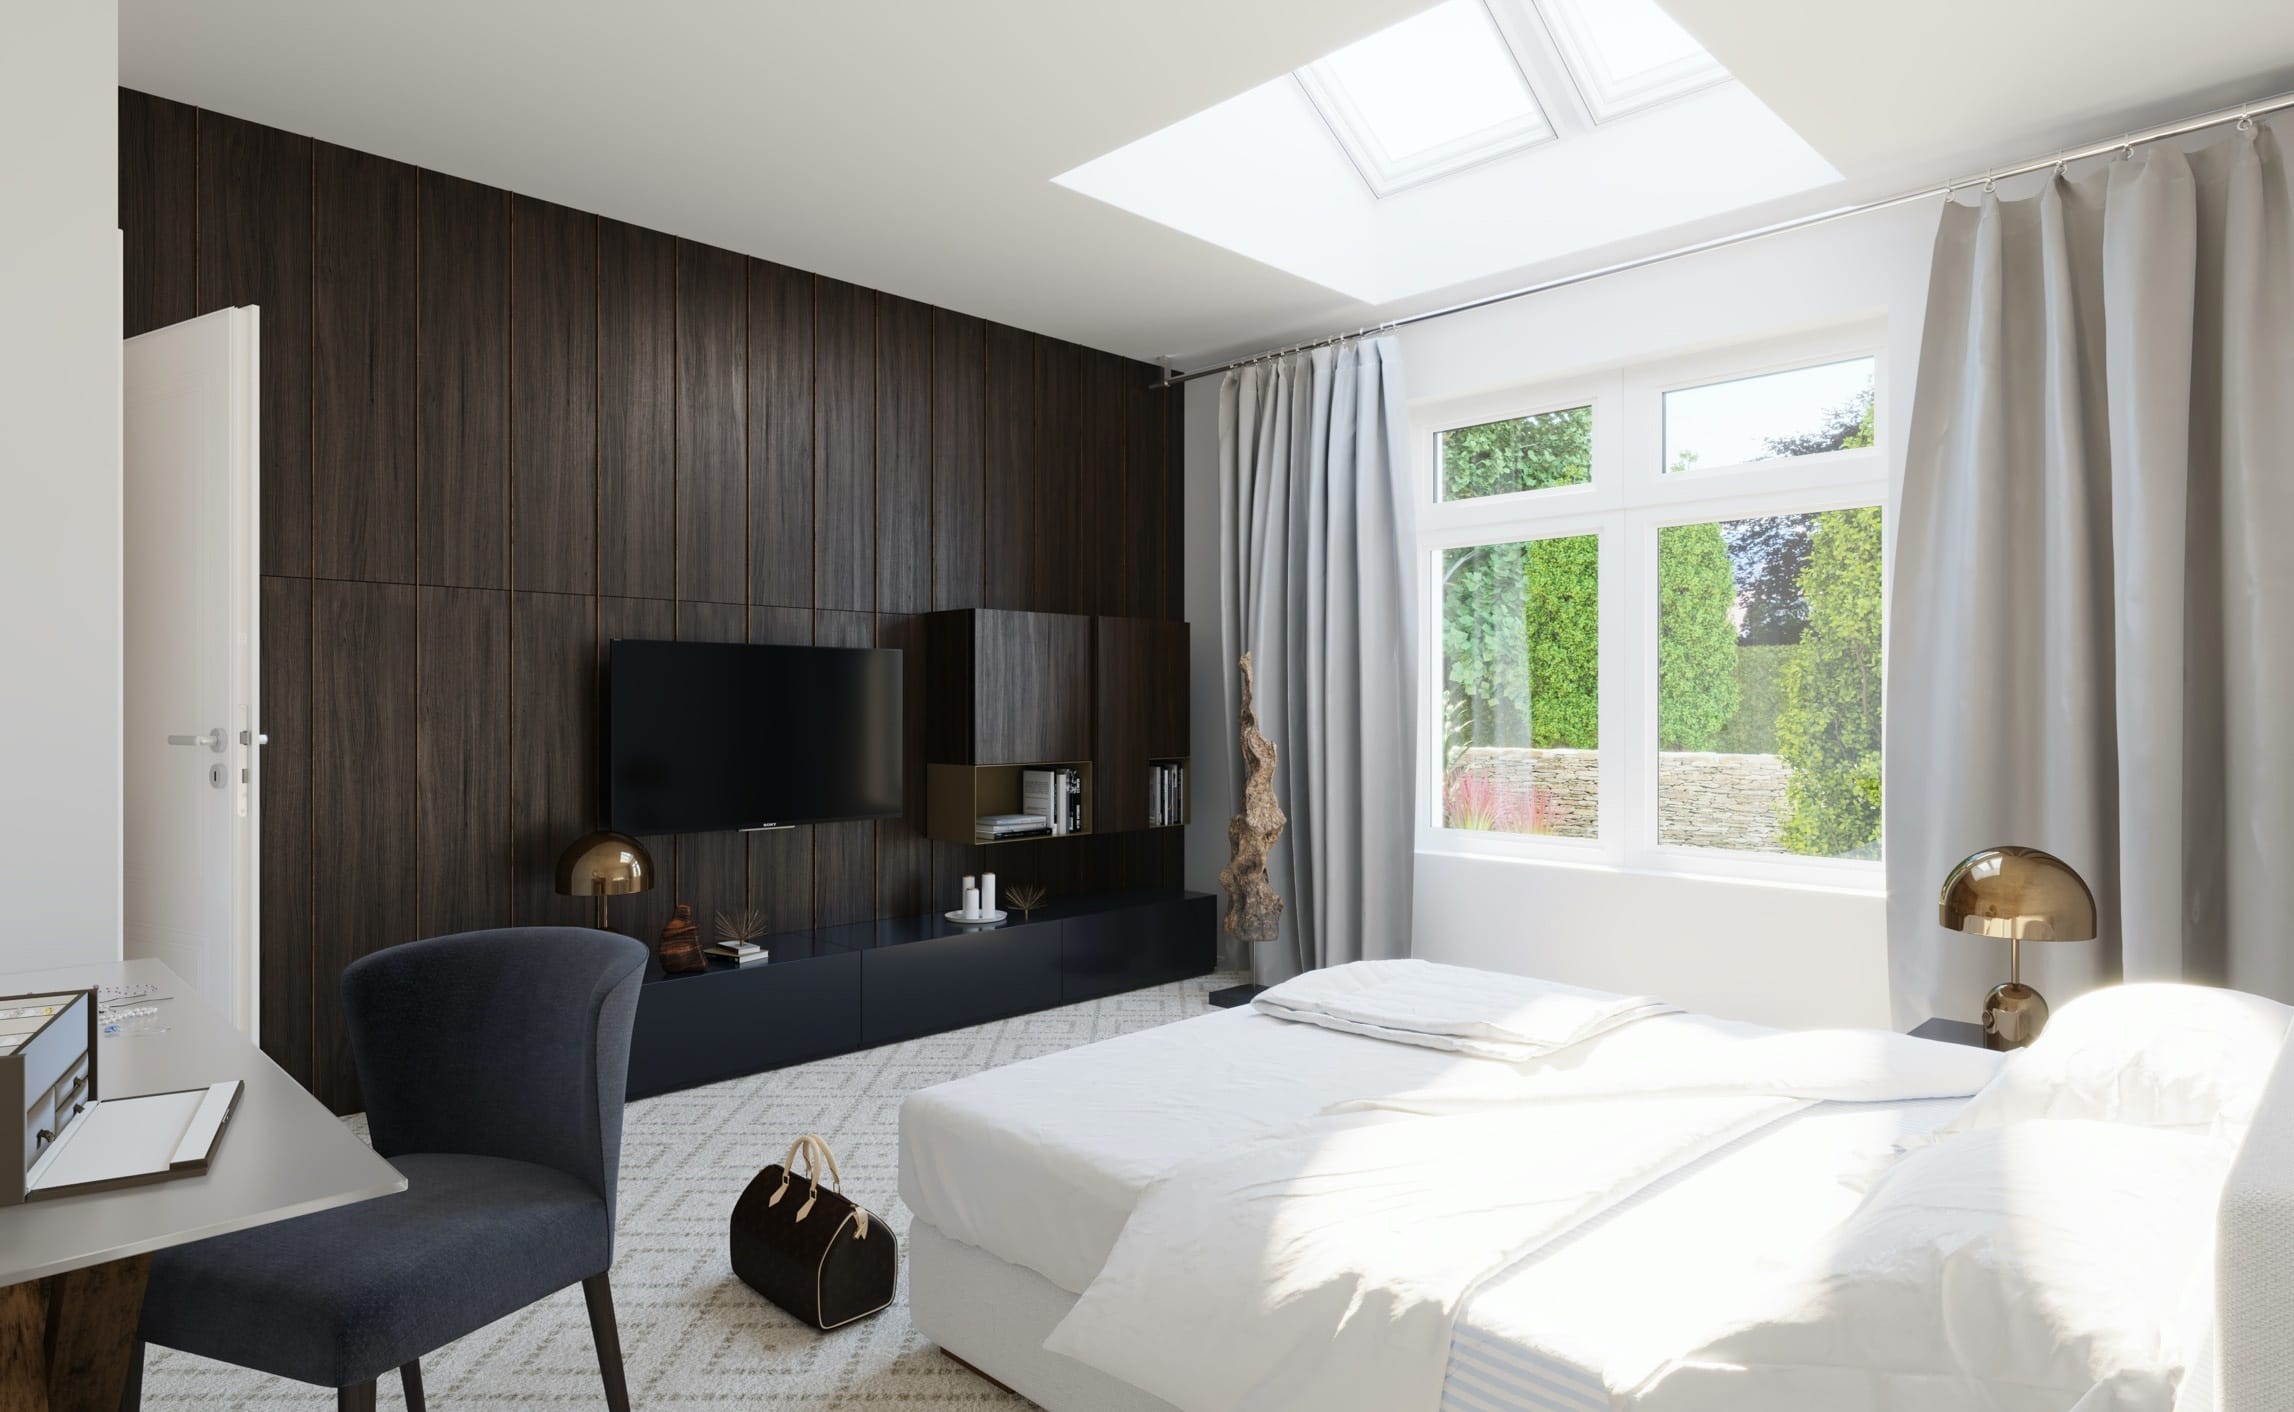 Bright bedroom with a dark wood wall has two skylights shining light on a white bed